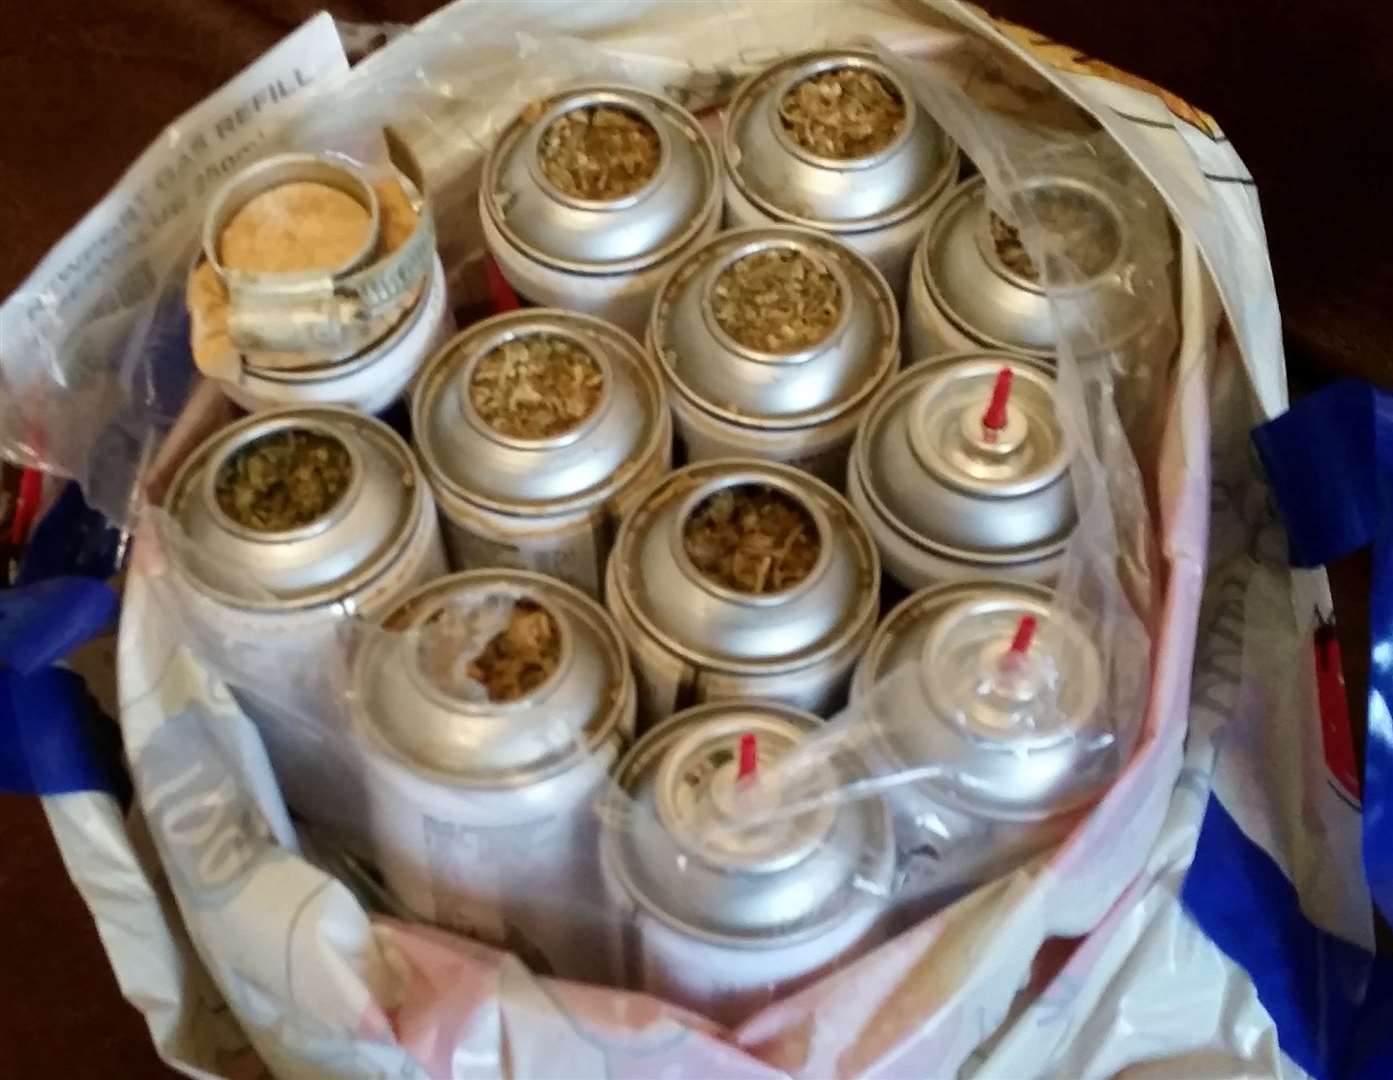 Butane gas cannisters though to be used to produce cannabis. Picture: Kent Police